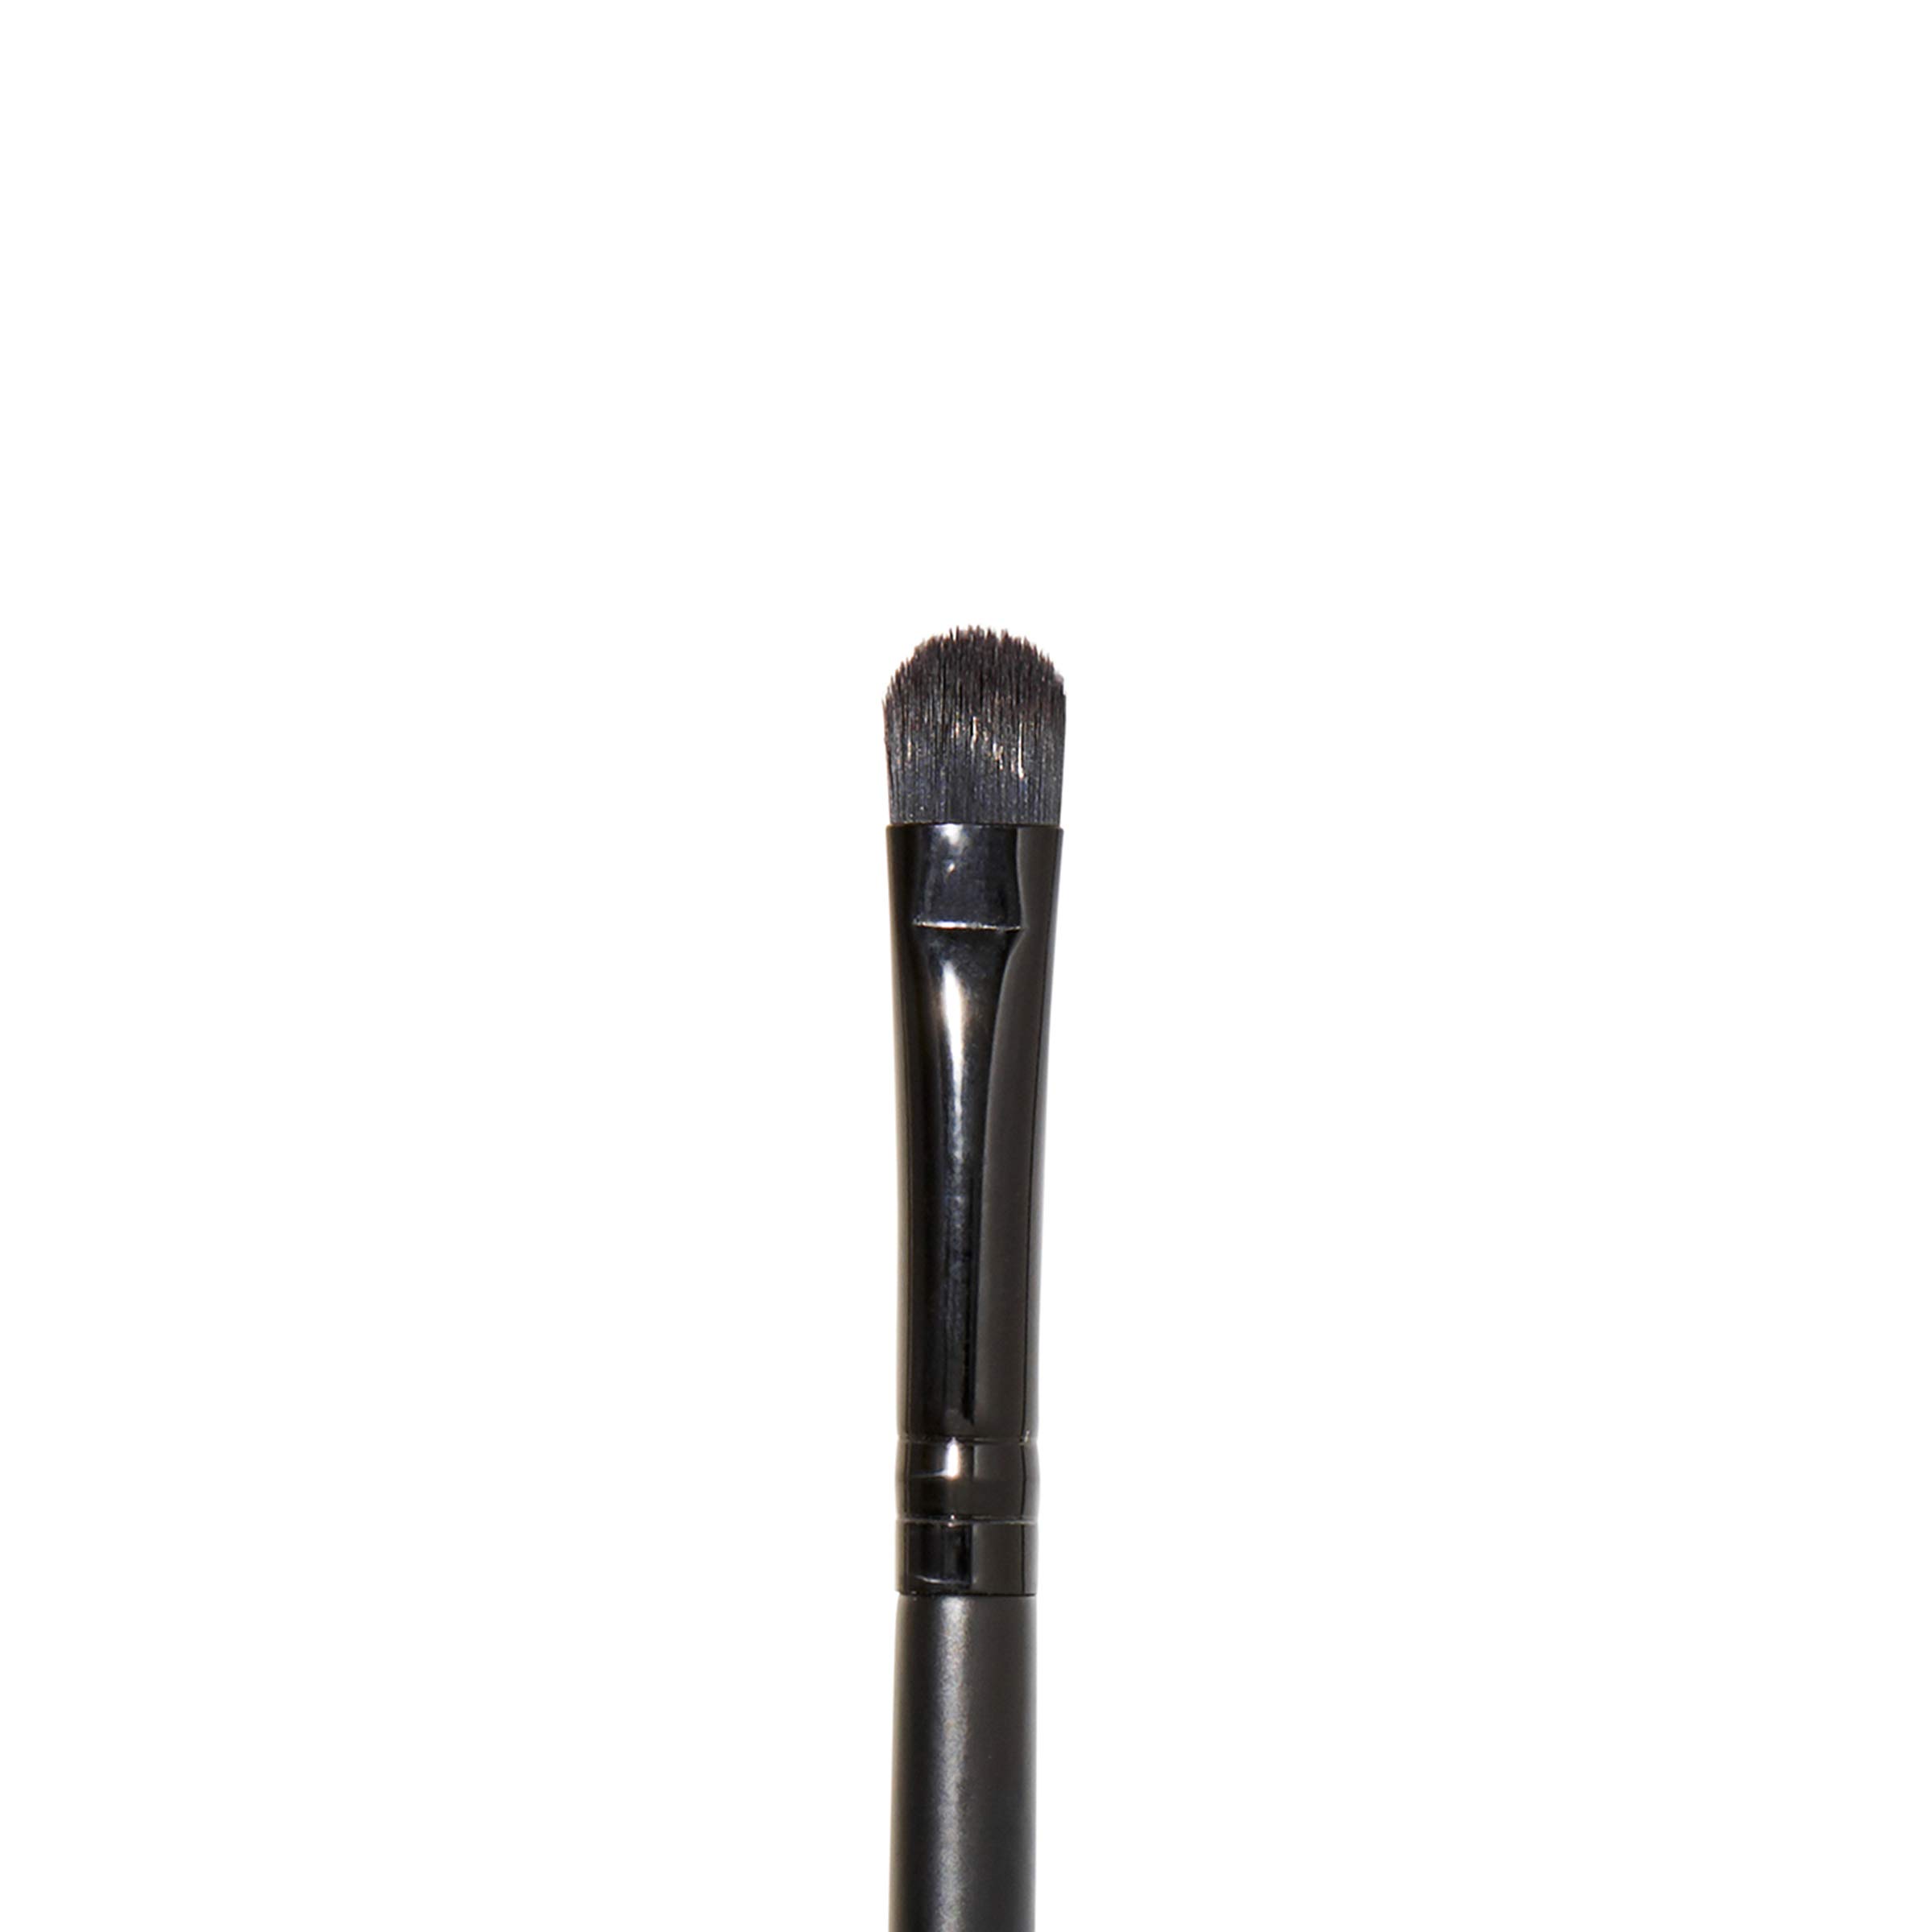 e.l.f. Cosmetics Concealer Brush, Flat Synthetic Brush is Ideal for Concealing Small Imperfections